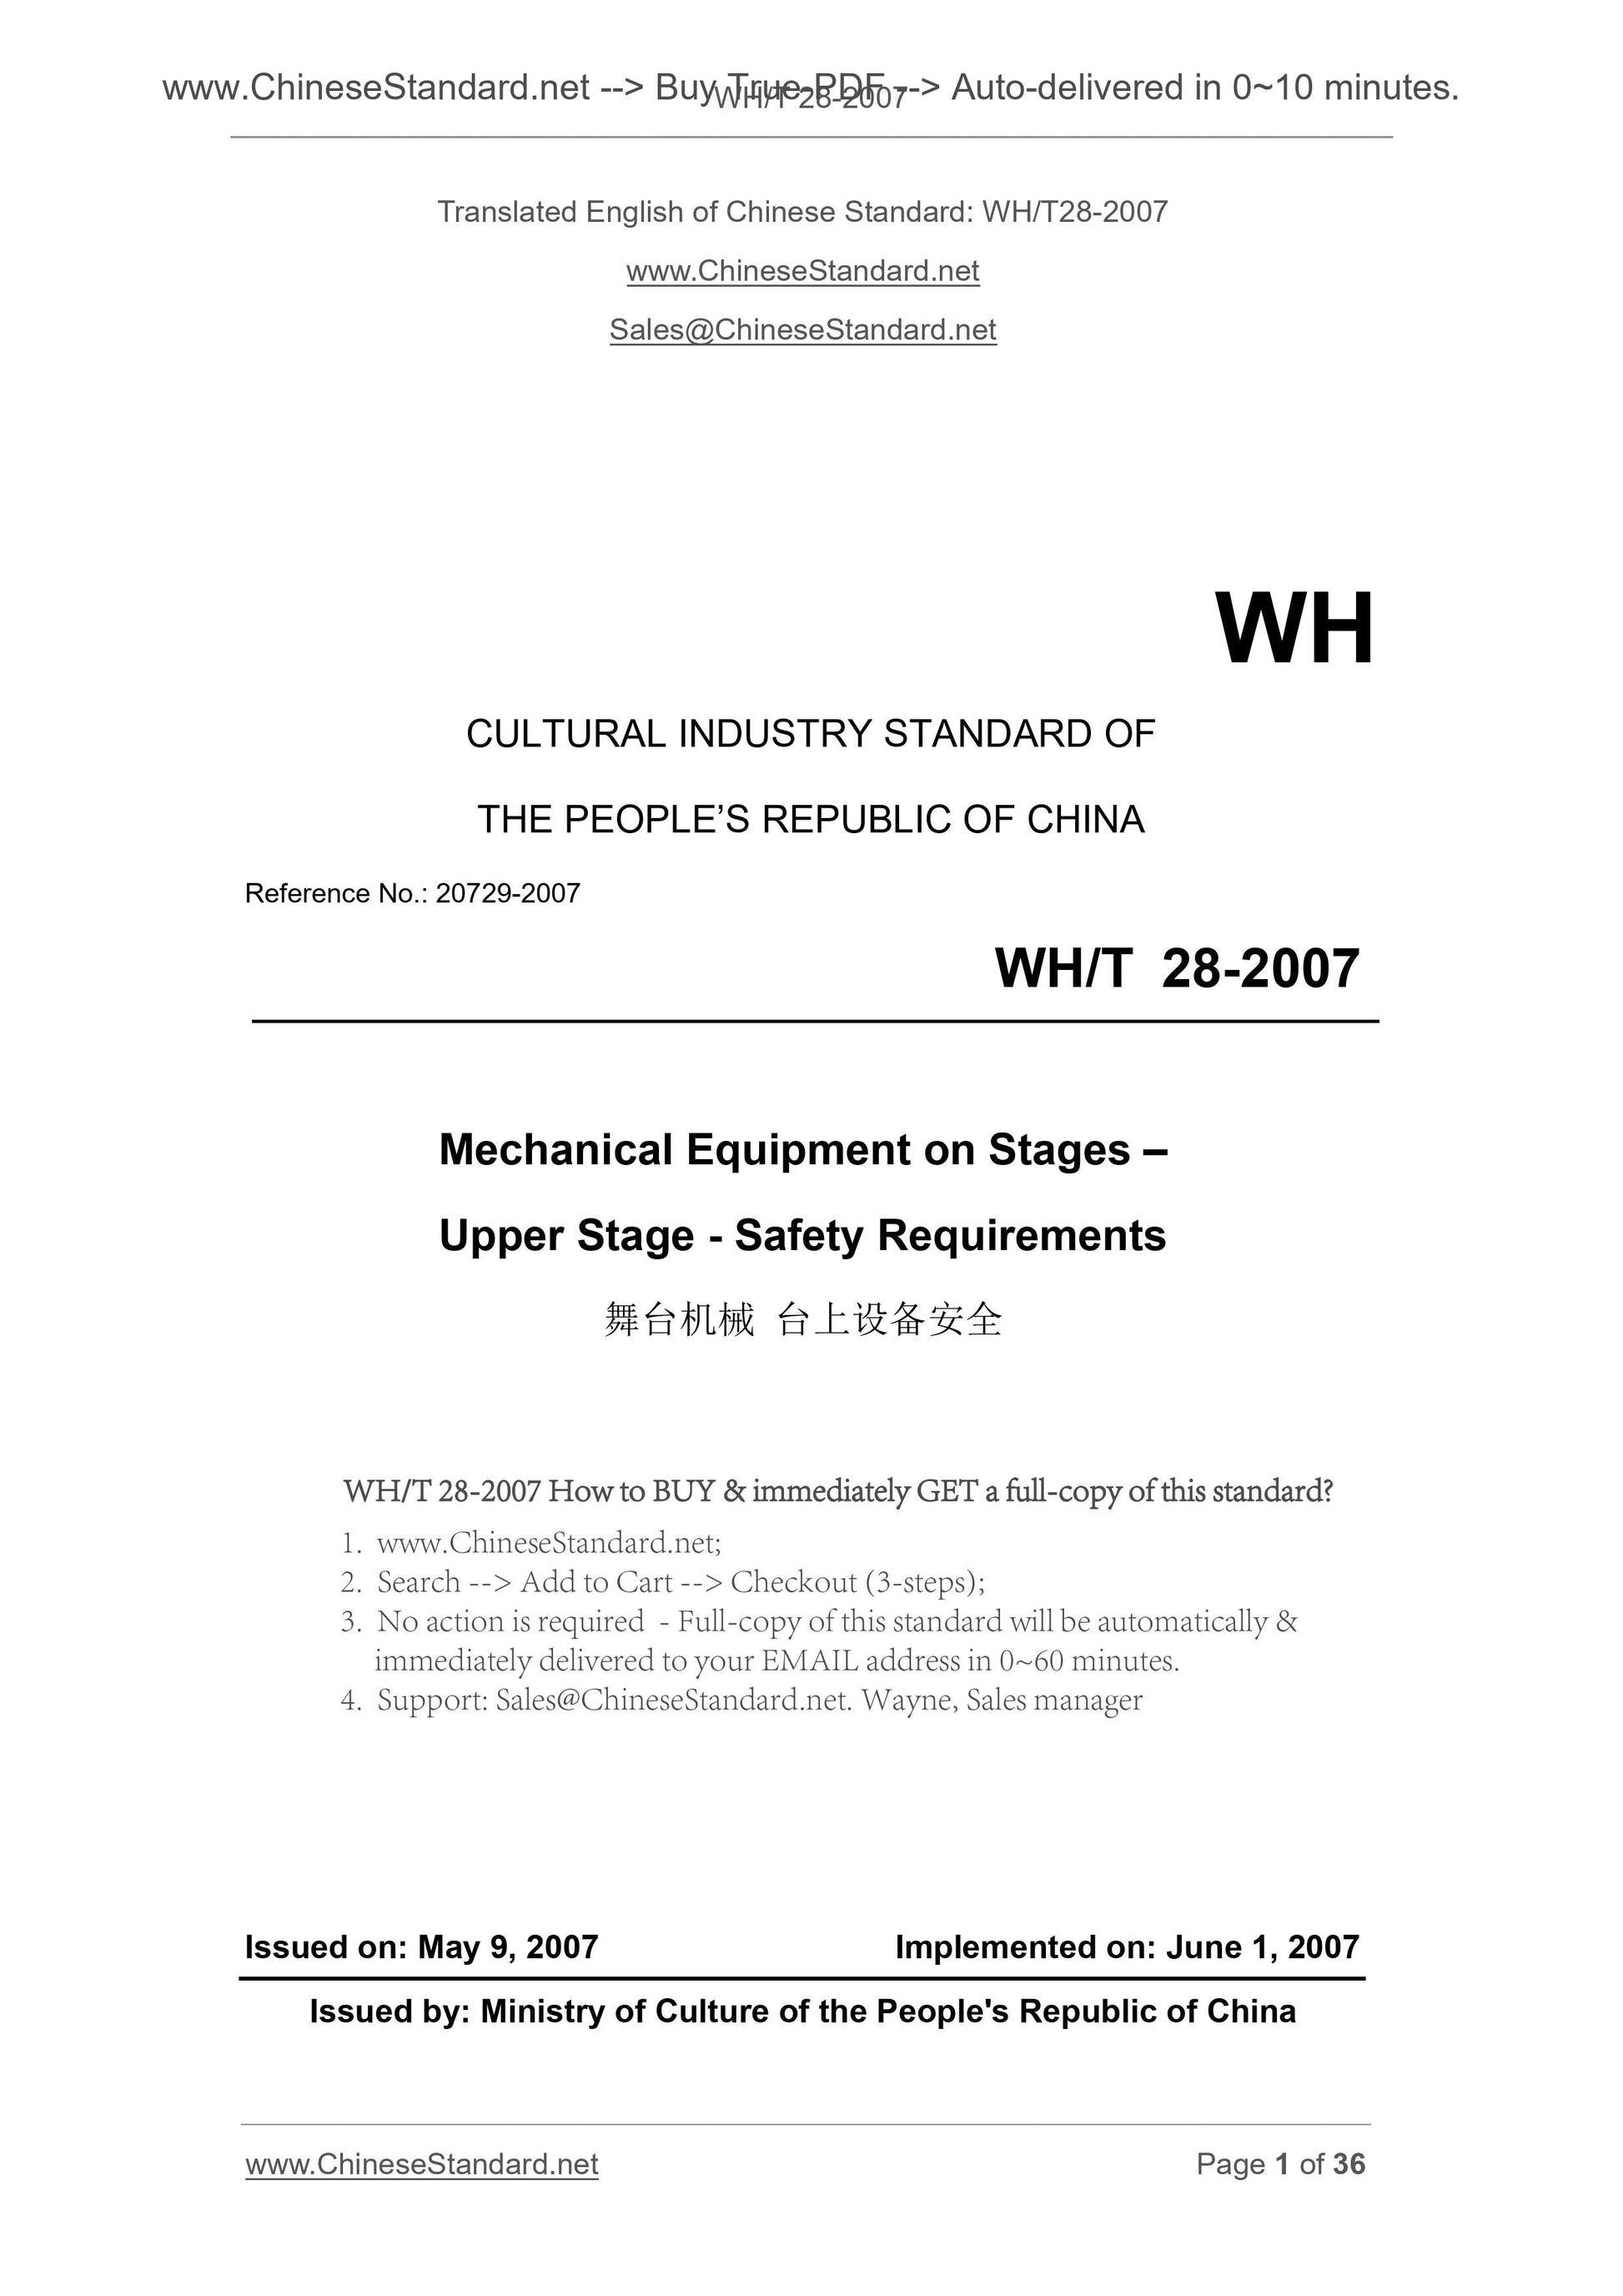 WH/T 28-2007 Page 1